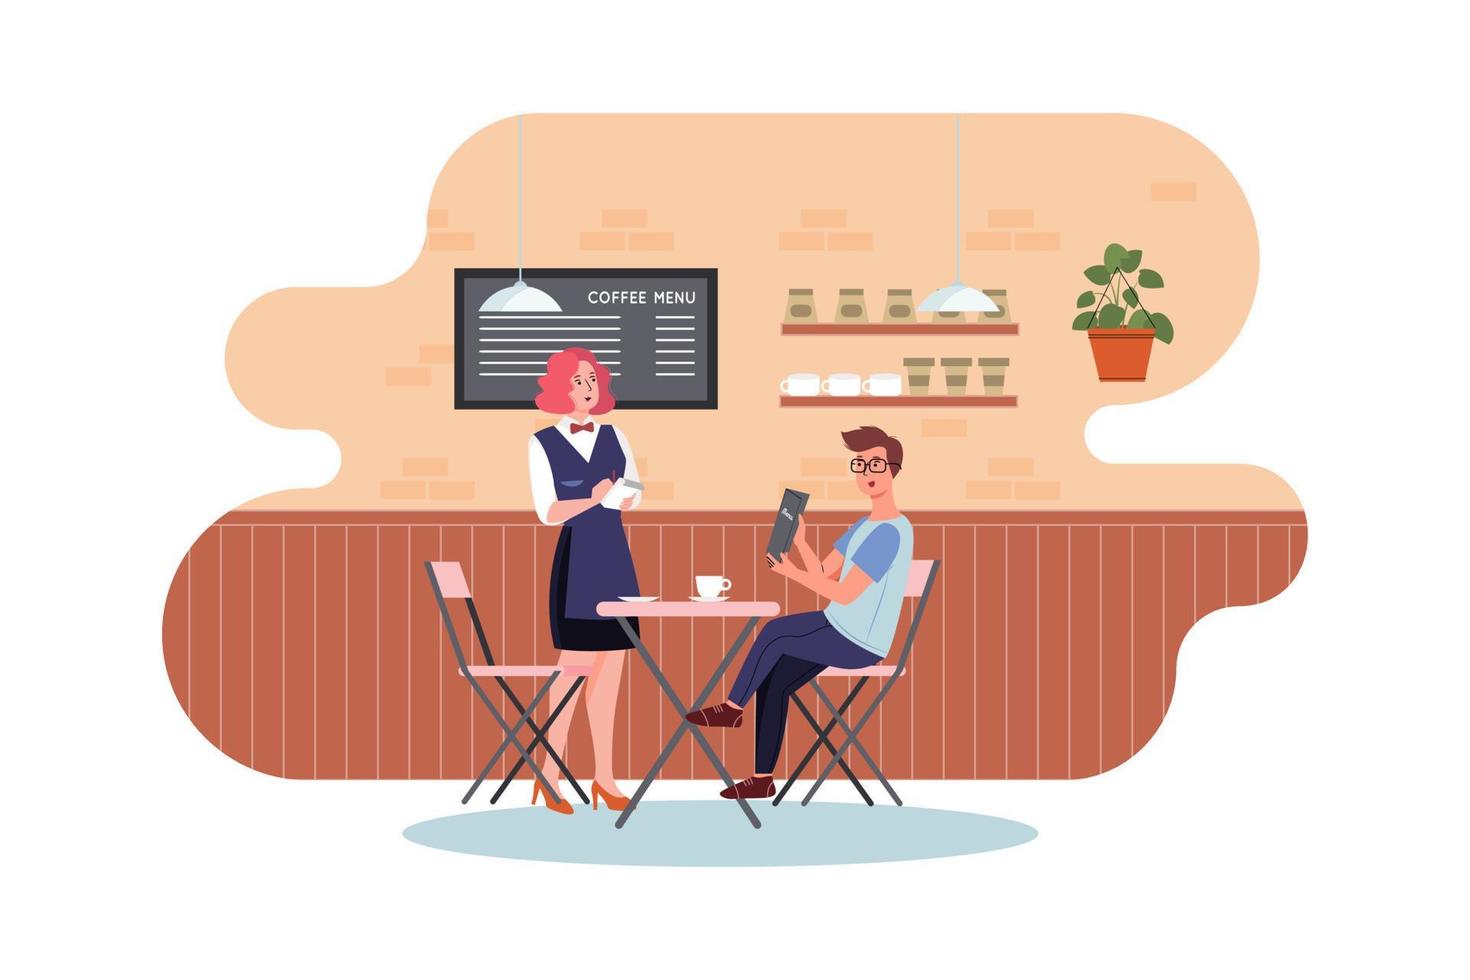 A waiter and a man ordering coffee in a coffee shop vector